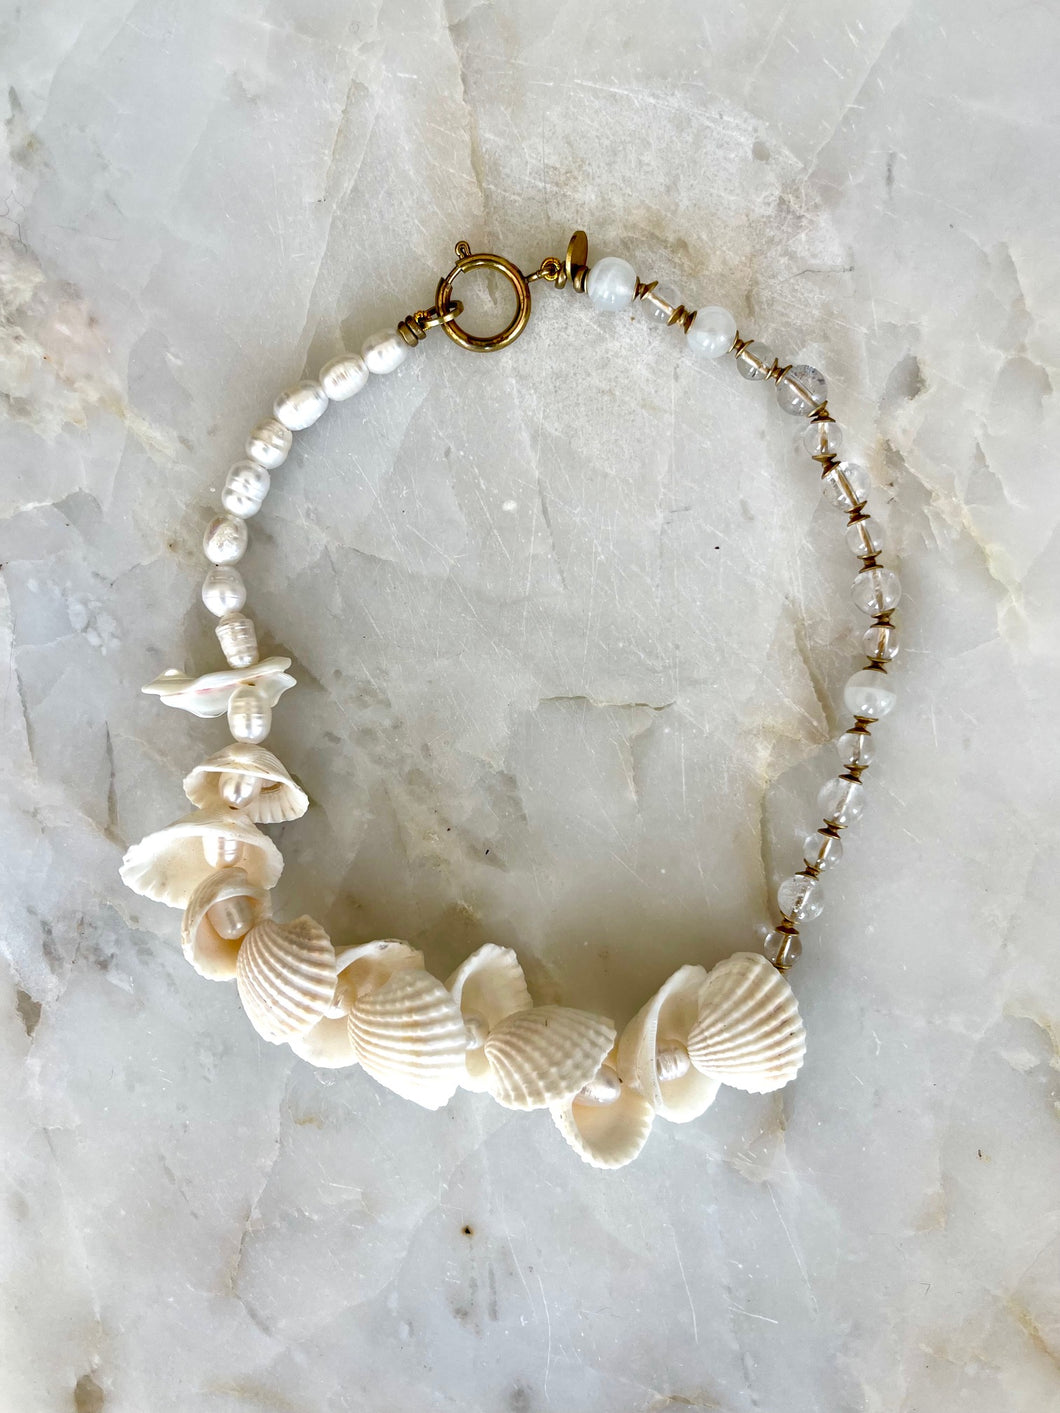 The Seashell Chic necklace